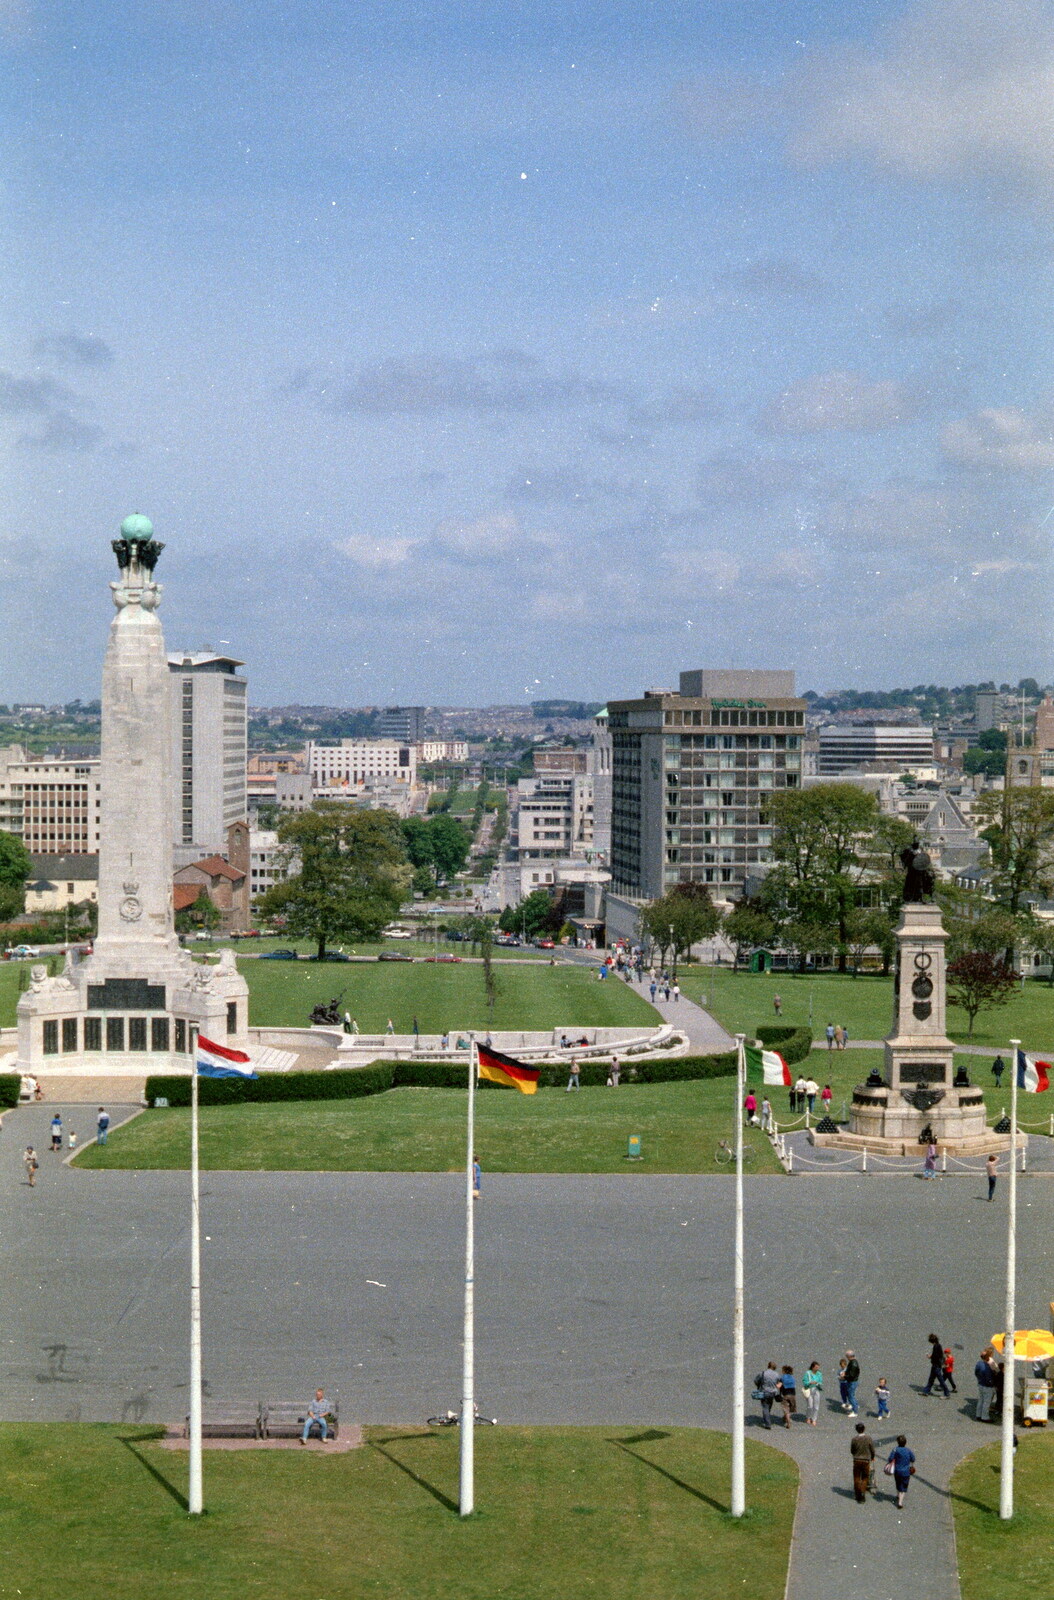 War Memorial, Civic Centre and the Holiday Inn from Uni: A Plymouth Hoe Panorama, Plymouth, Devon - 7th May 1986